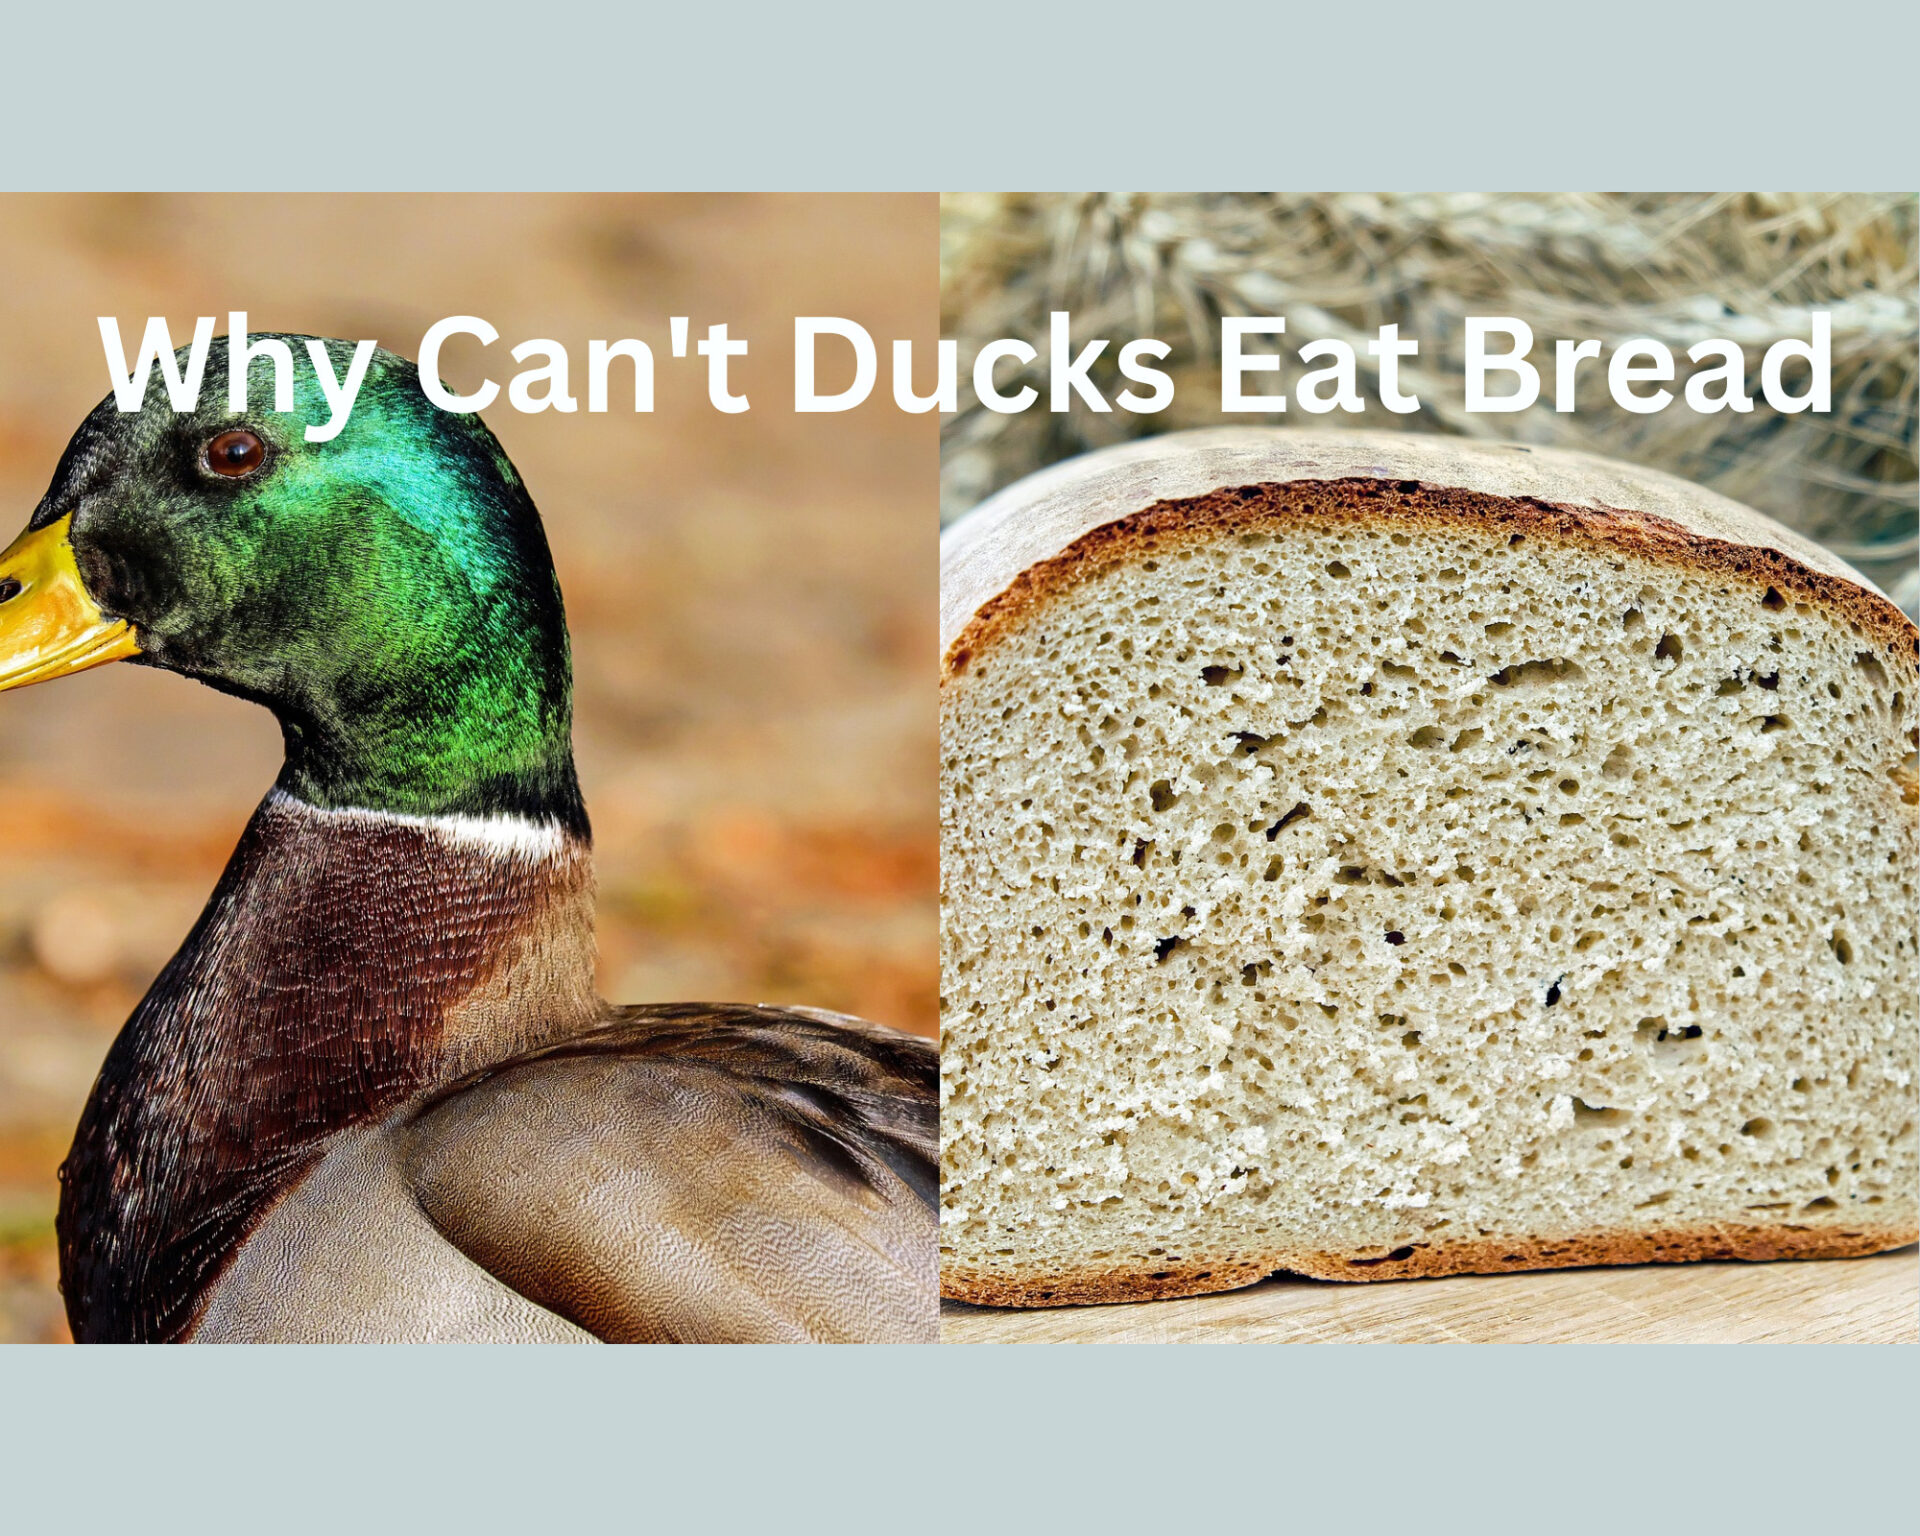 Why Can’t Ducks Eat Bread?